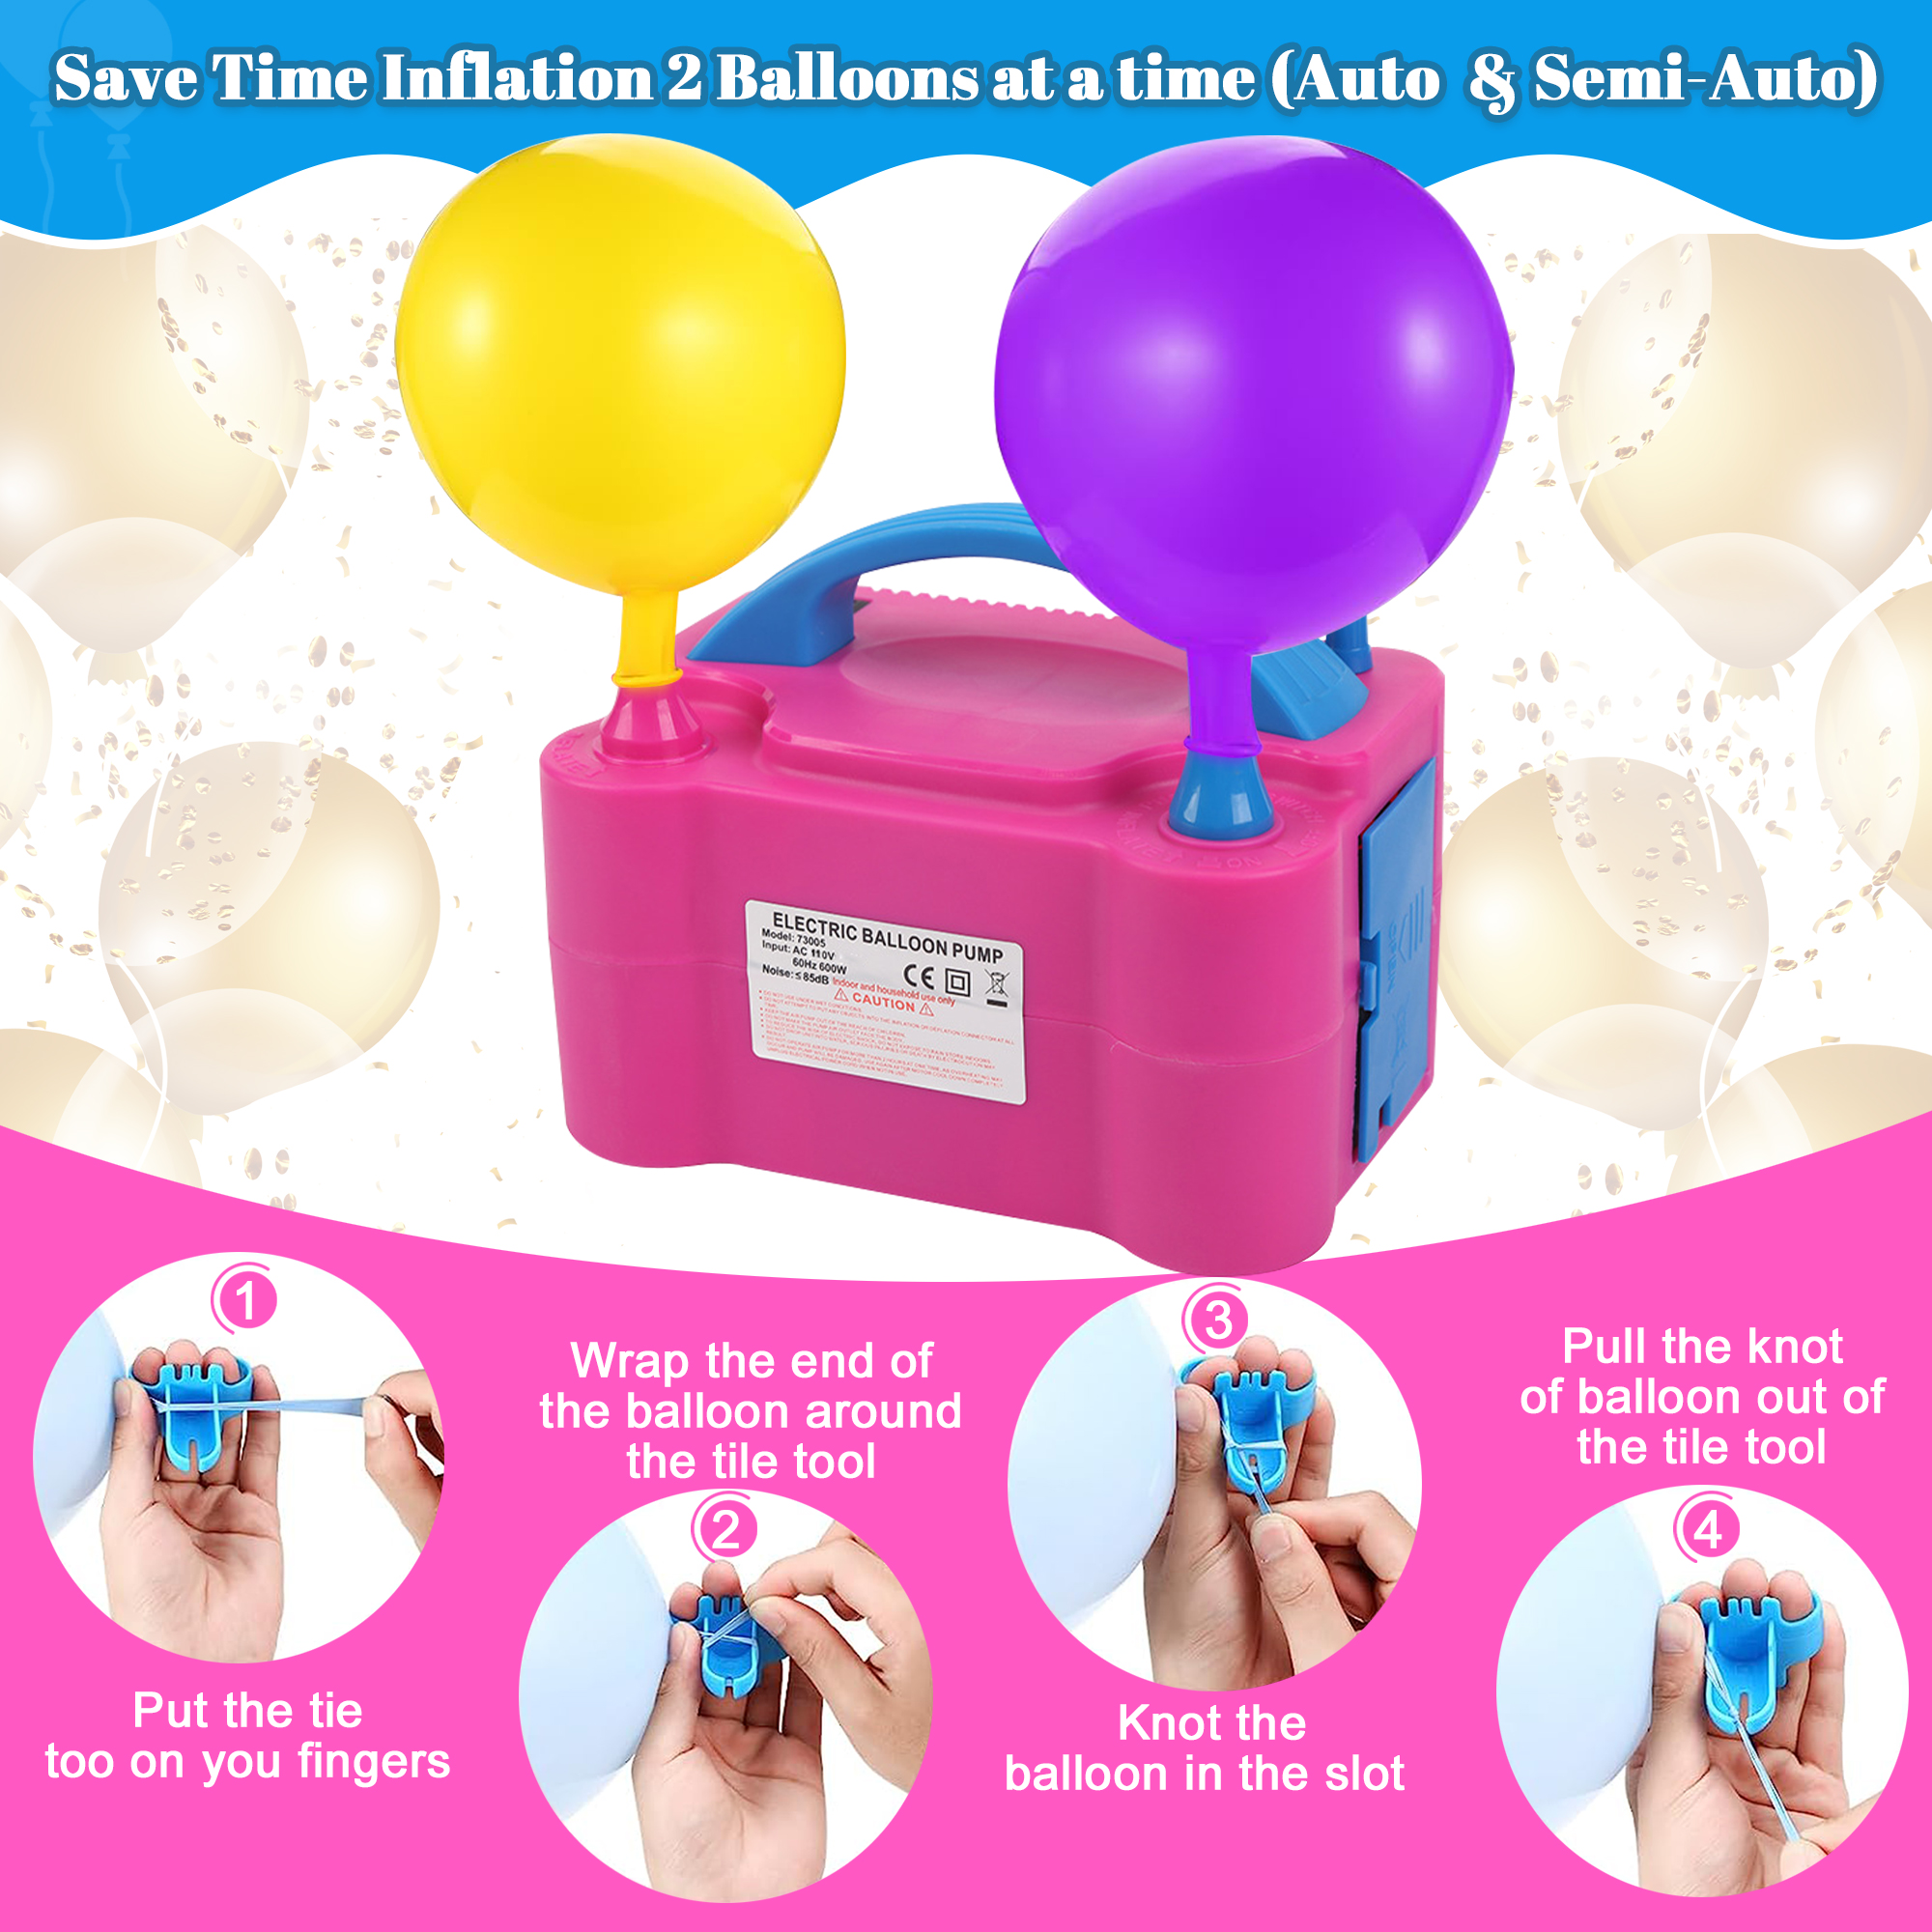 IZNEN Electric Balloon Pump, Portable Dual Nozzle Blower Air Balloon Pump & Inflator for All Balloons Party Wedding Decoration - image 3 of 8